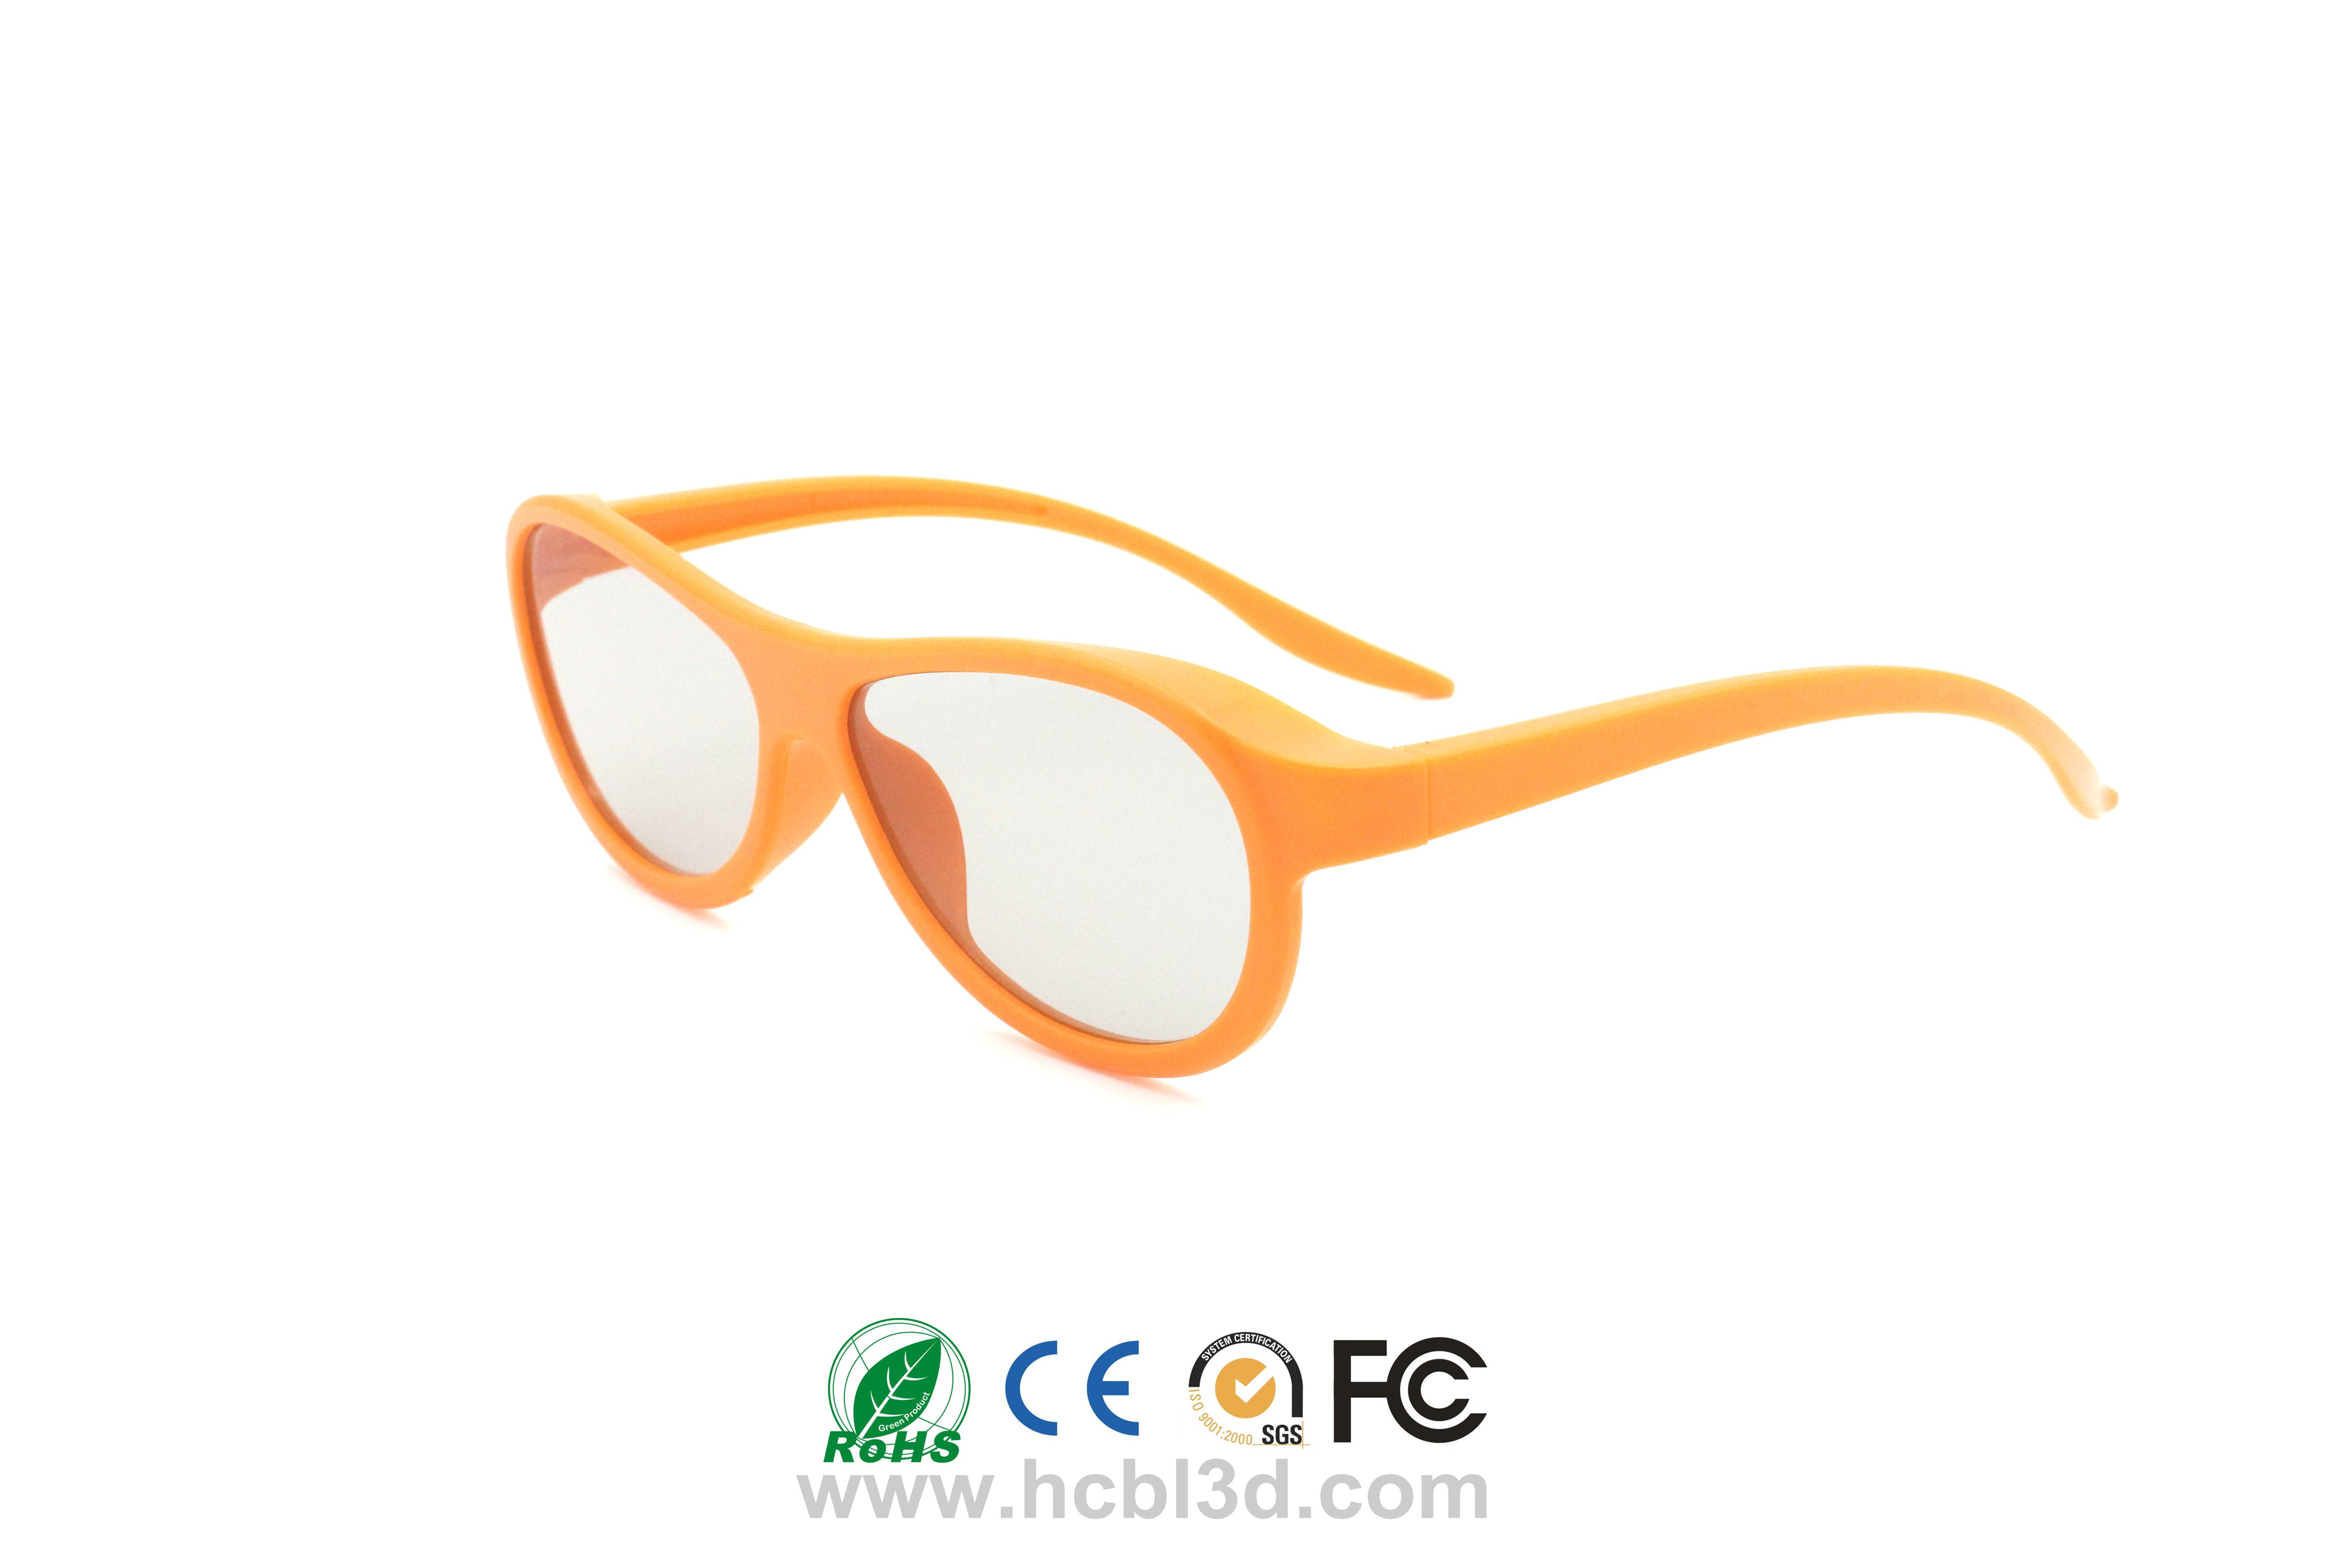 Disposable passive 3D glasses with orange ABS frame for adult & child